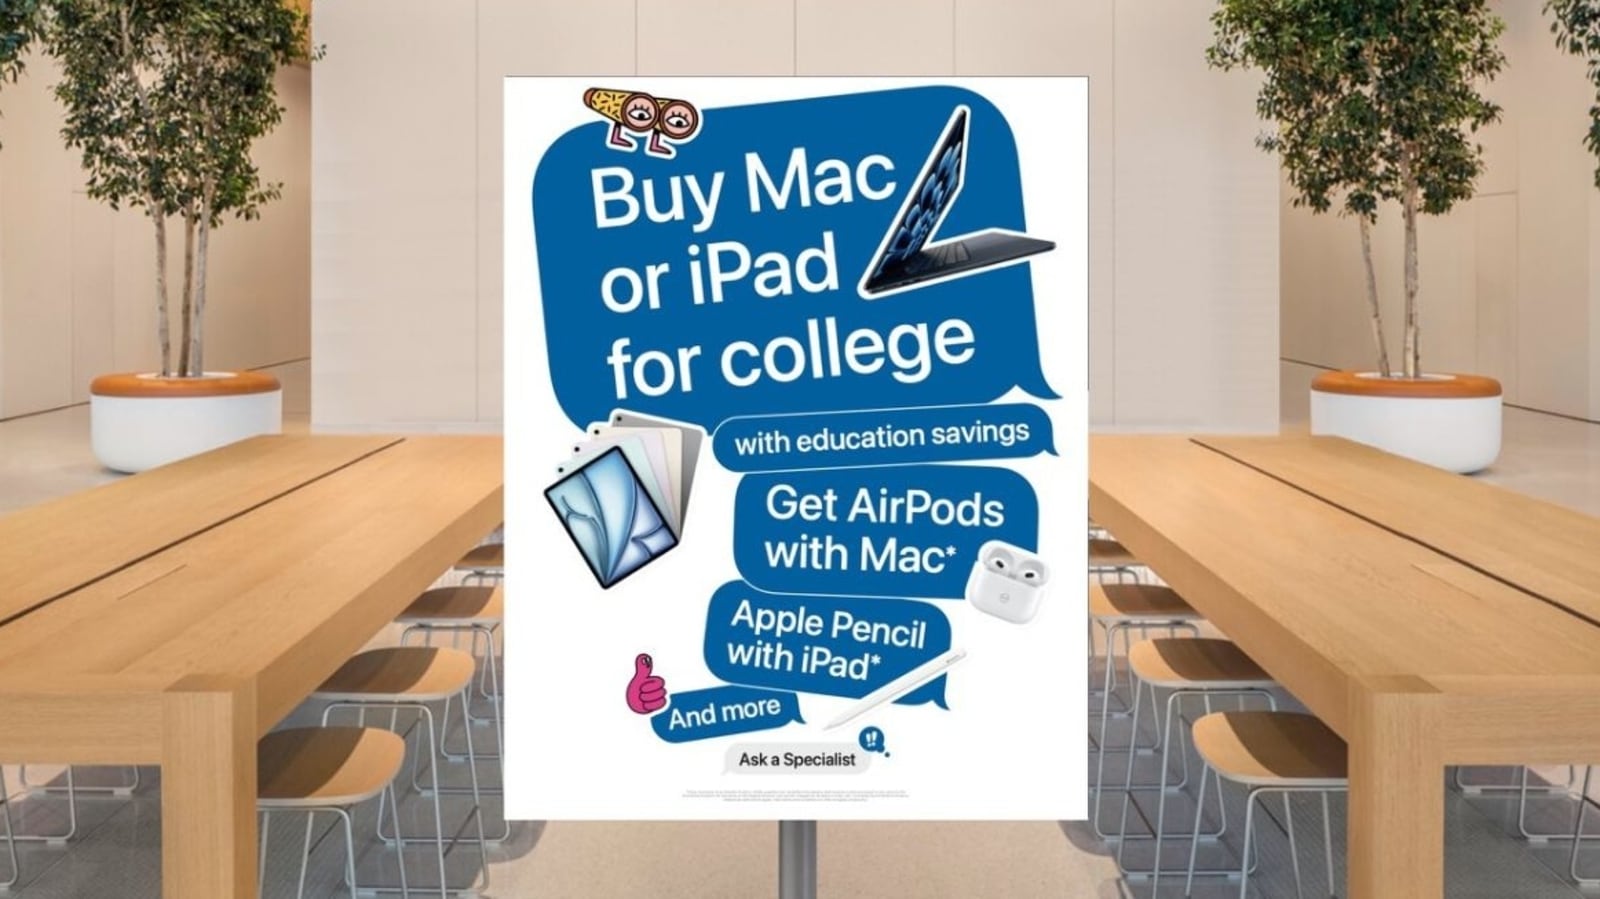 Apple back-to-school current in India: Get completely free AirPods or Apple Pencil with Mac and iPad – All specifics